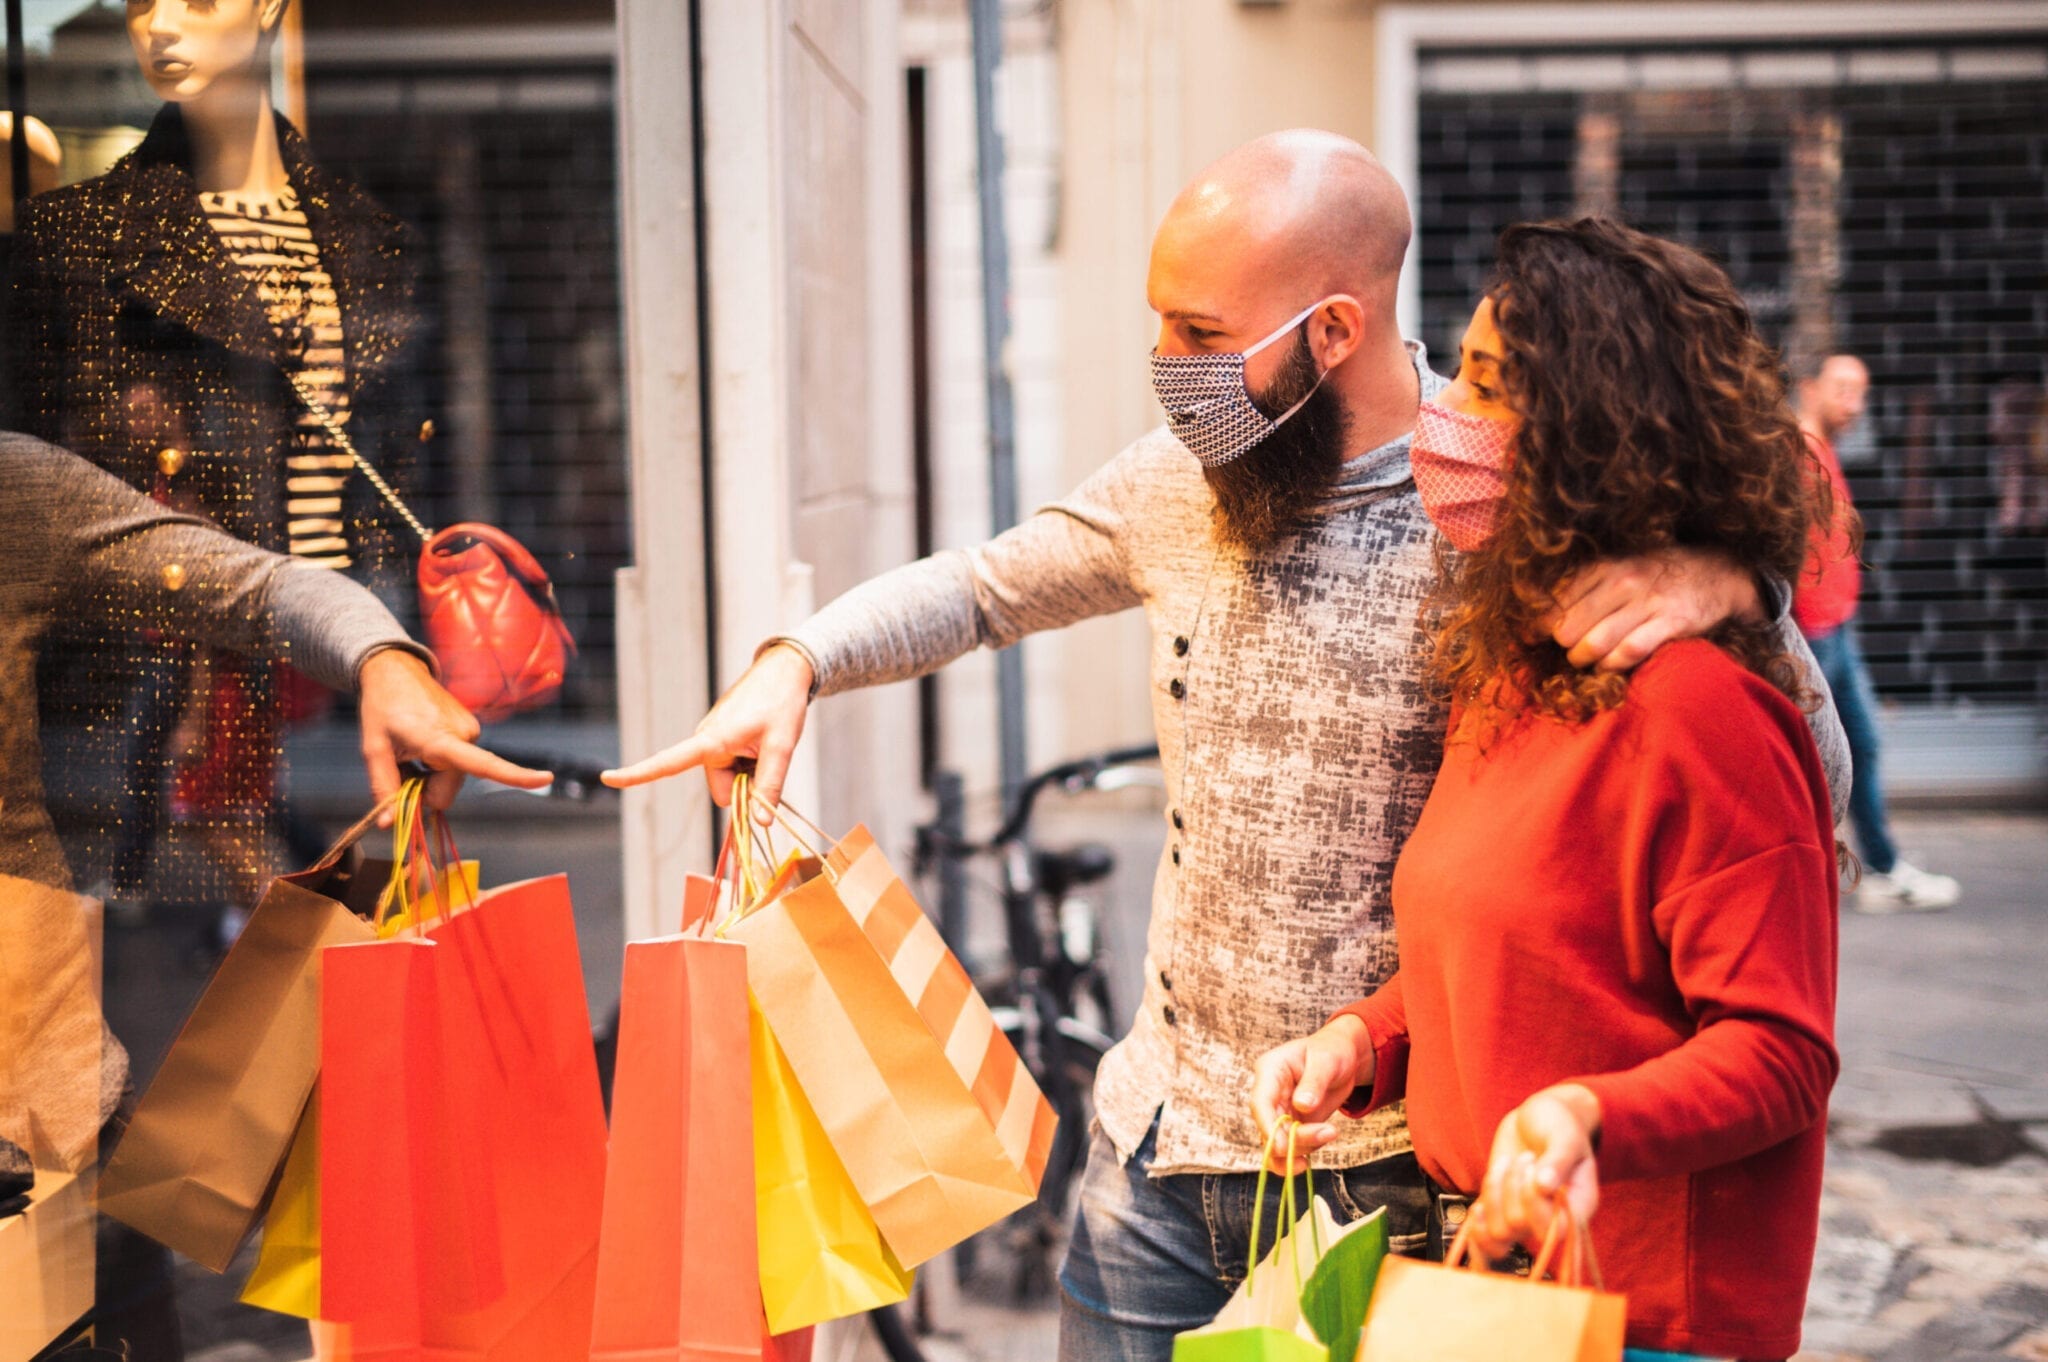 Amazing Christmas Shopping Tips to Help Save Time and Money